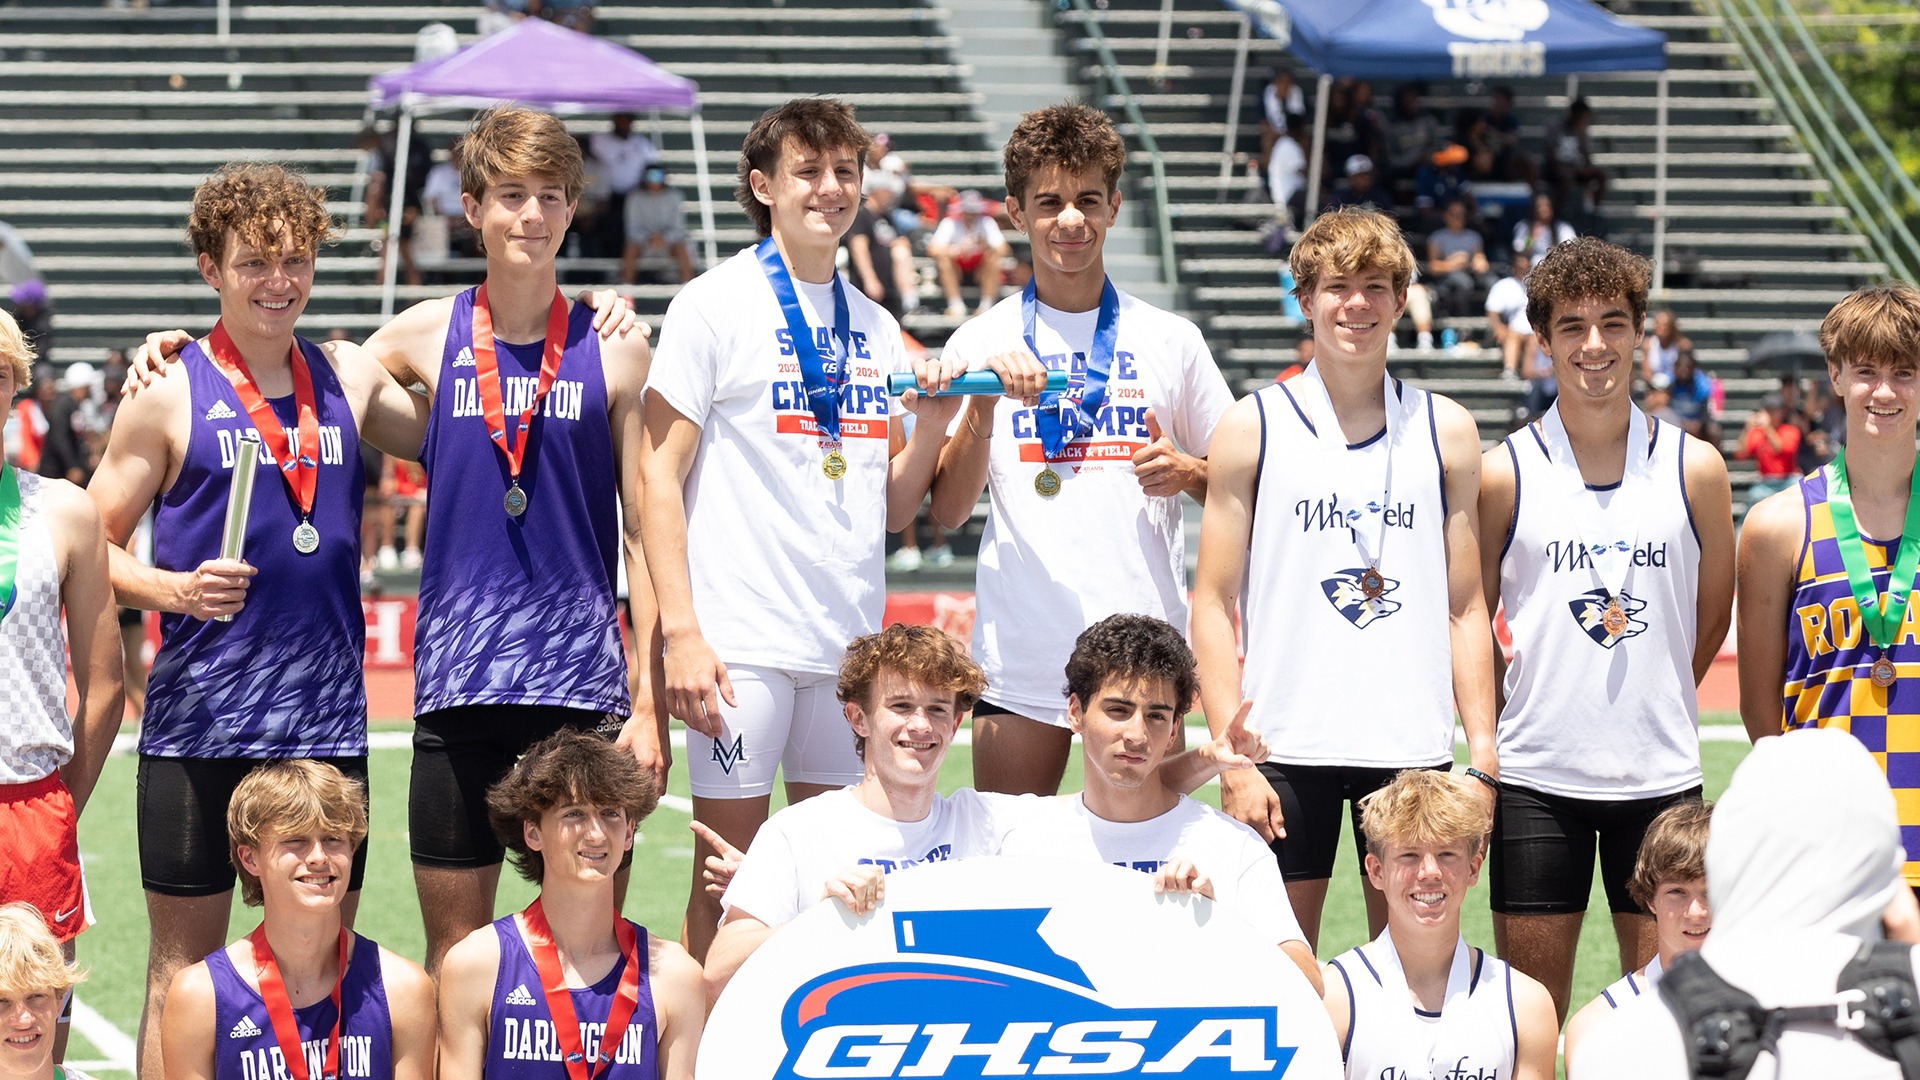 MUSTANGS CLOSE SEASON WITH STRONG SHOWING AT GHSA TRACK & FIELD STATE CHAMPIONSHIPS